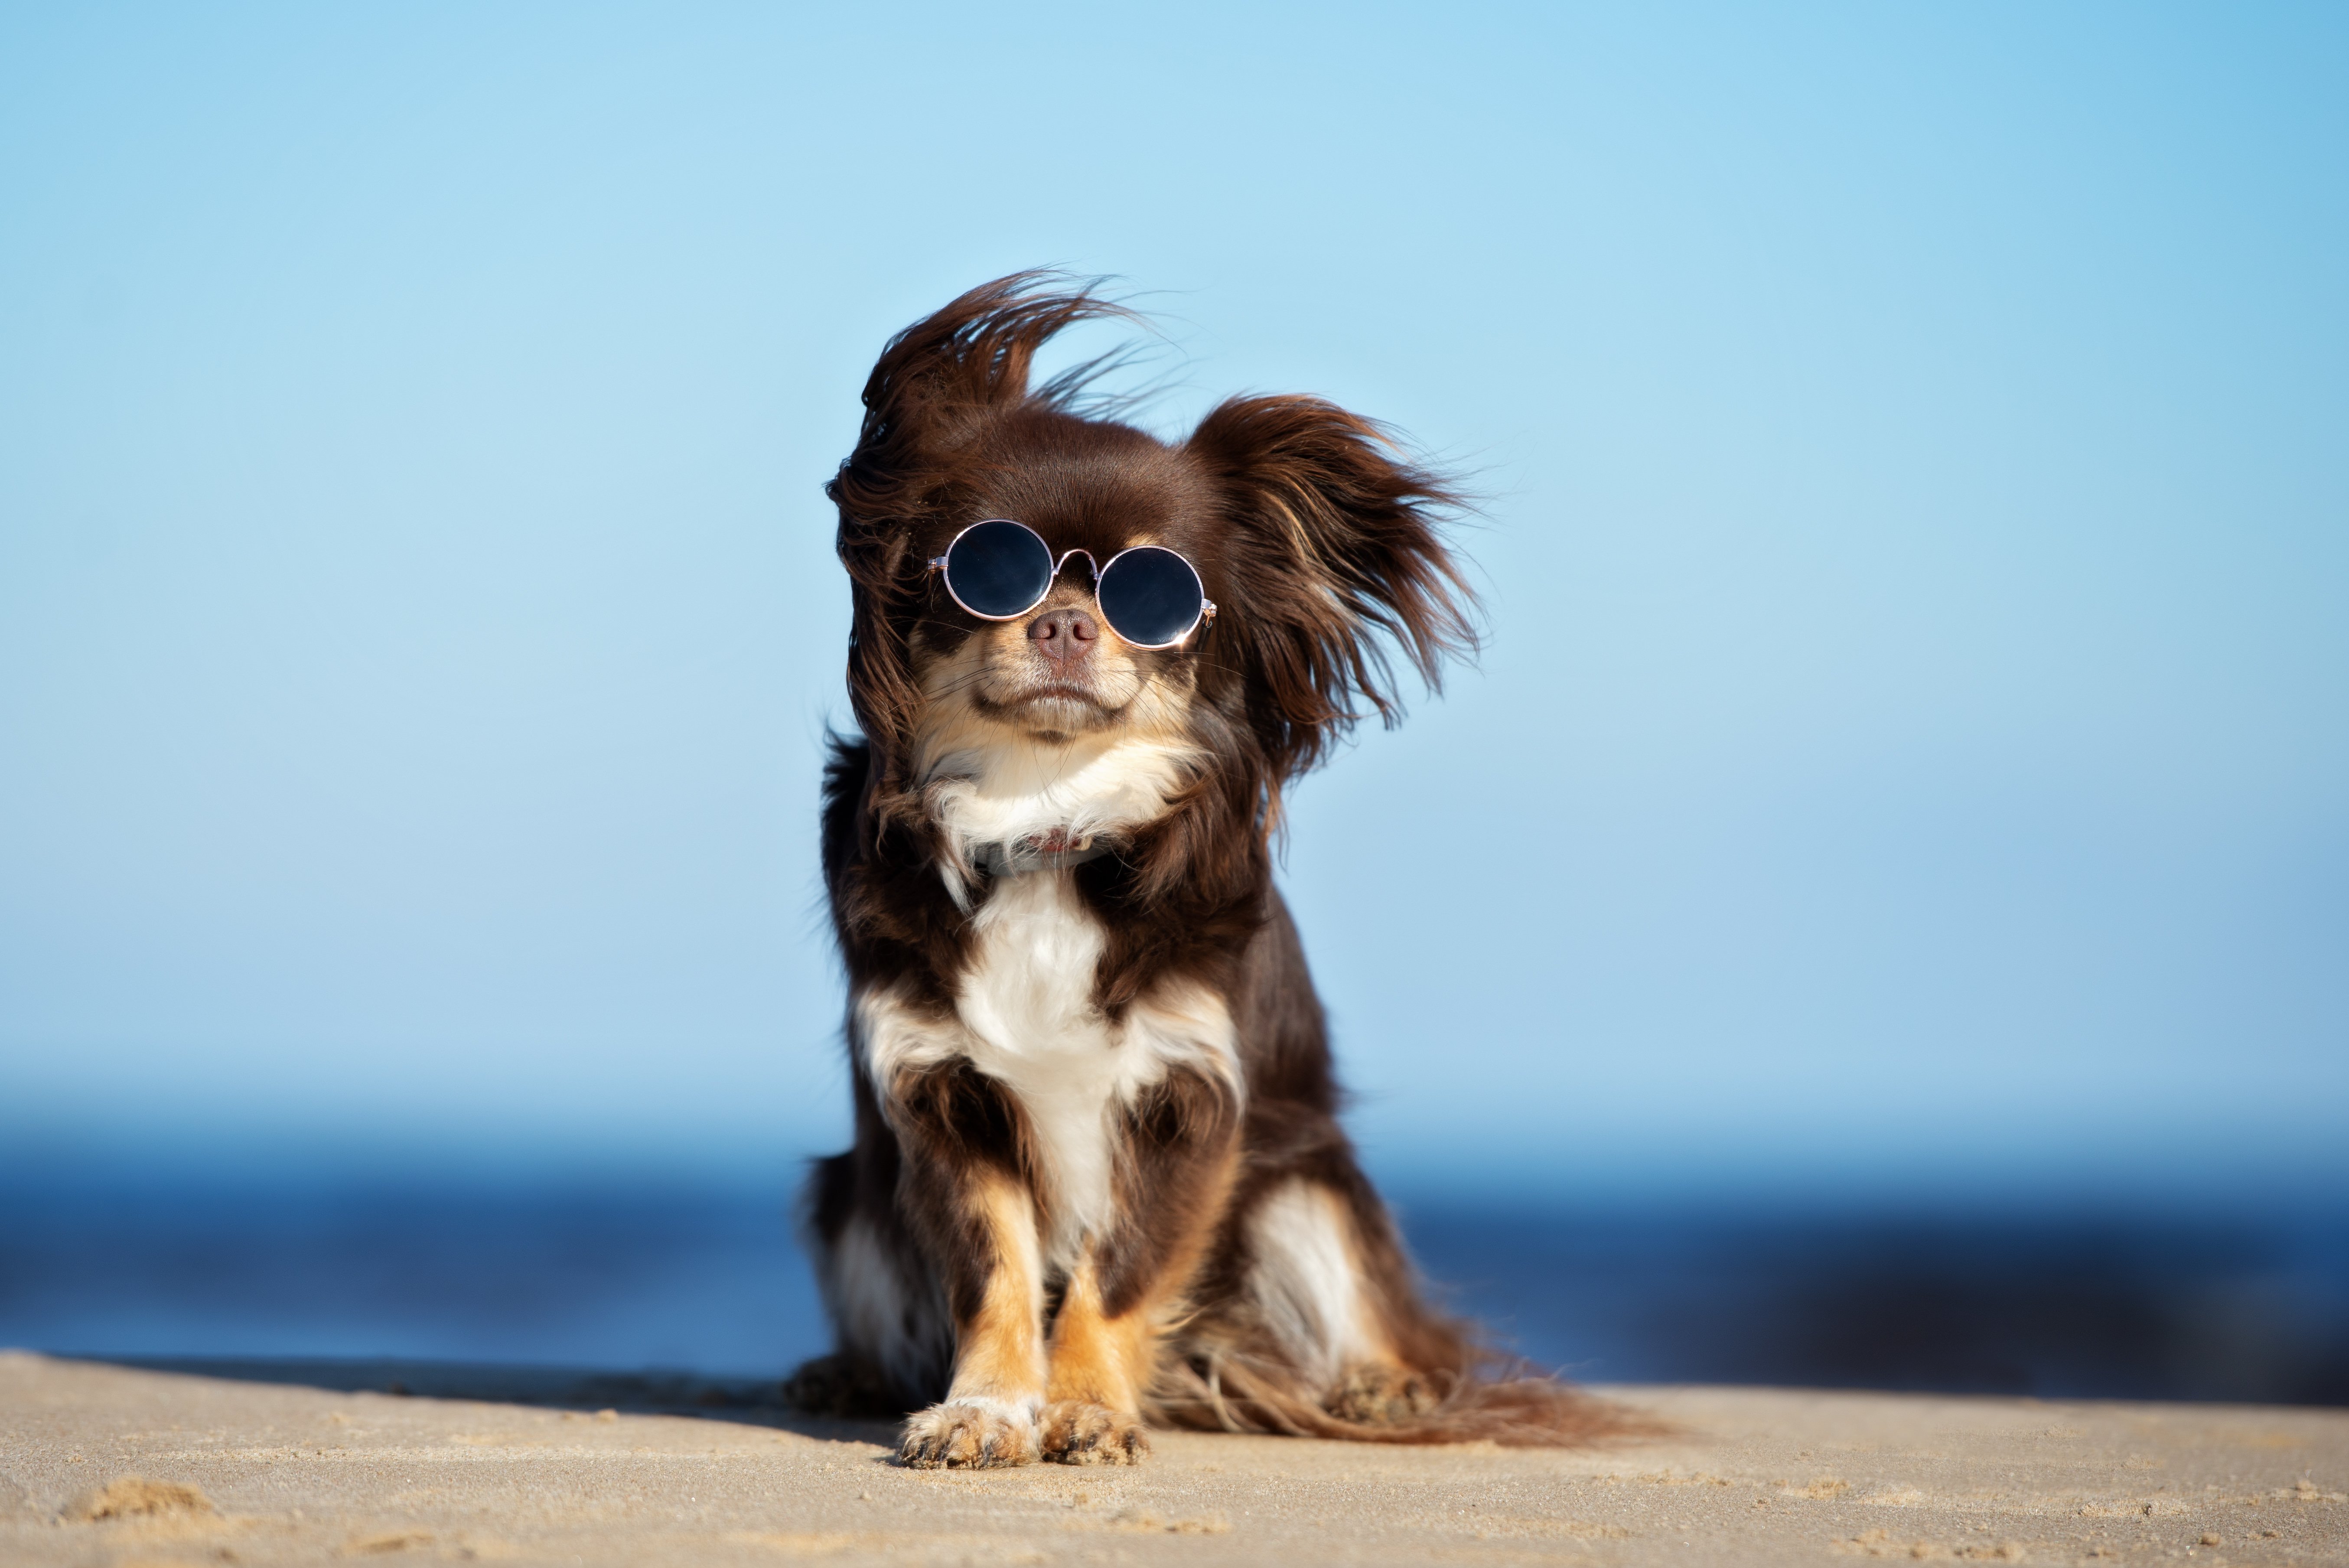 Funny Chihuahua dog posing on a beach in sunglasses | Photo: Shutterstock